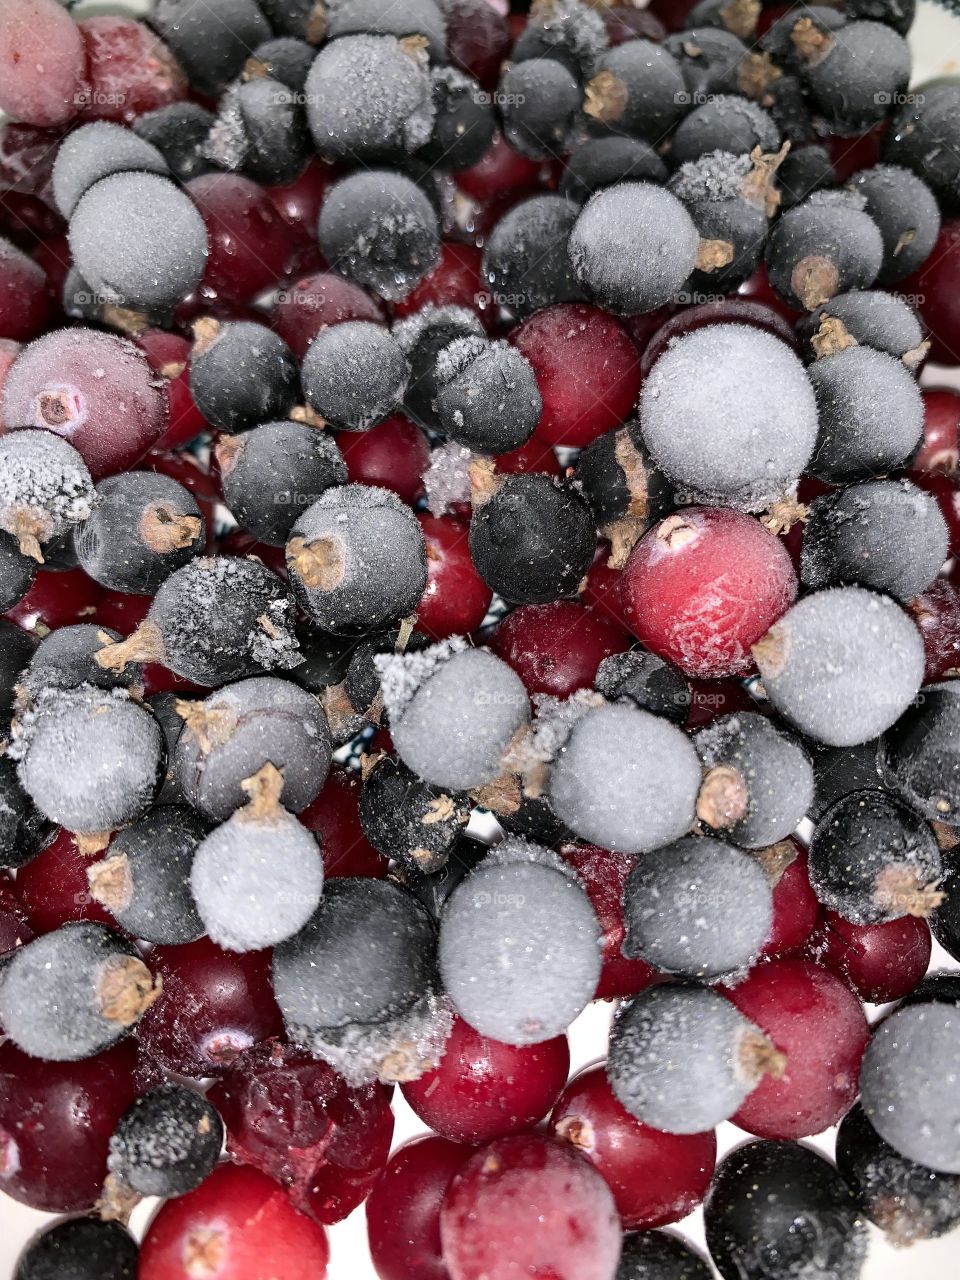 useful and vitamin berries of black currant and cranberry frozen for the winter